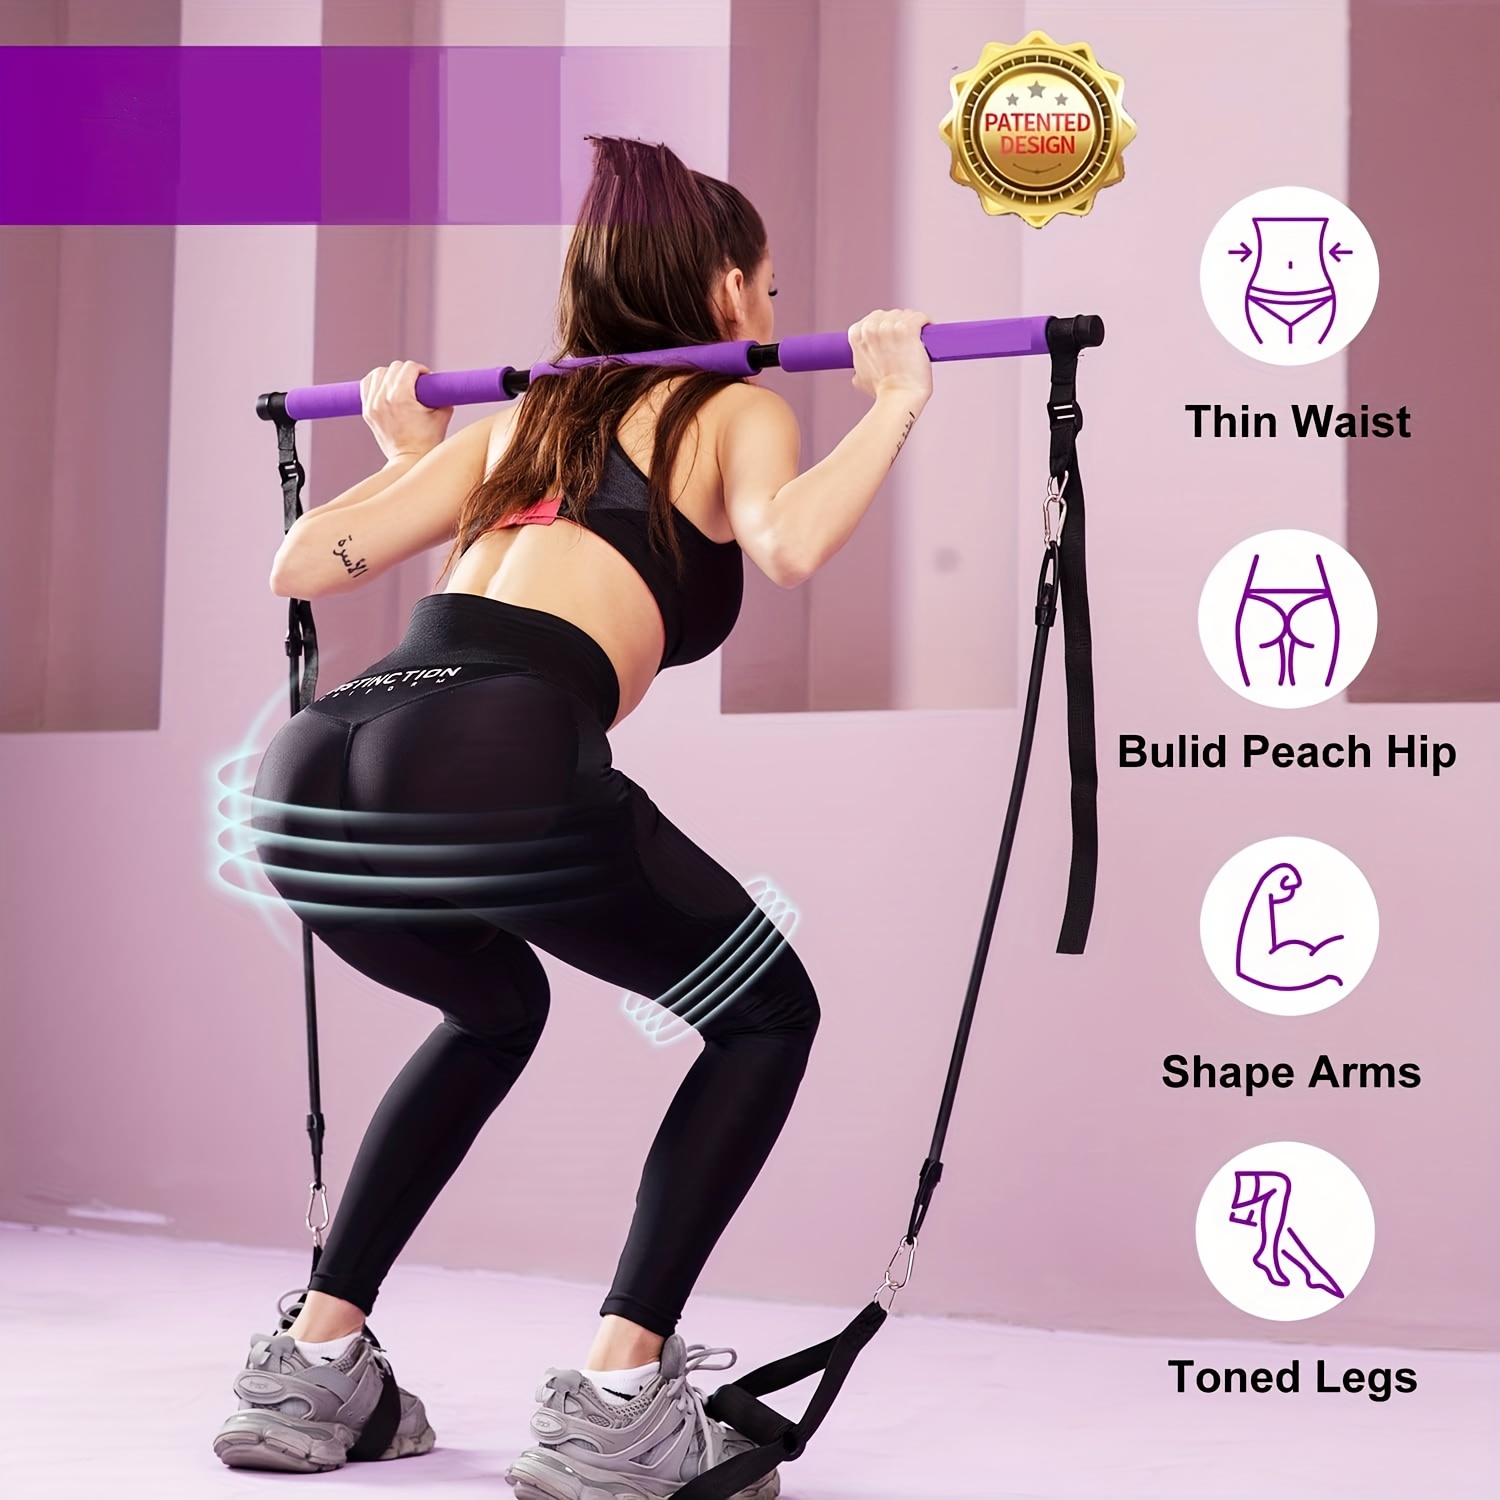 Pilates Bar Kit With Resistance Bands Workout Equipment Home Gym  Multifunctional Pilates Bar Fitness Equipment With Resistance